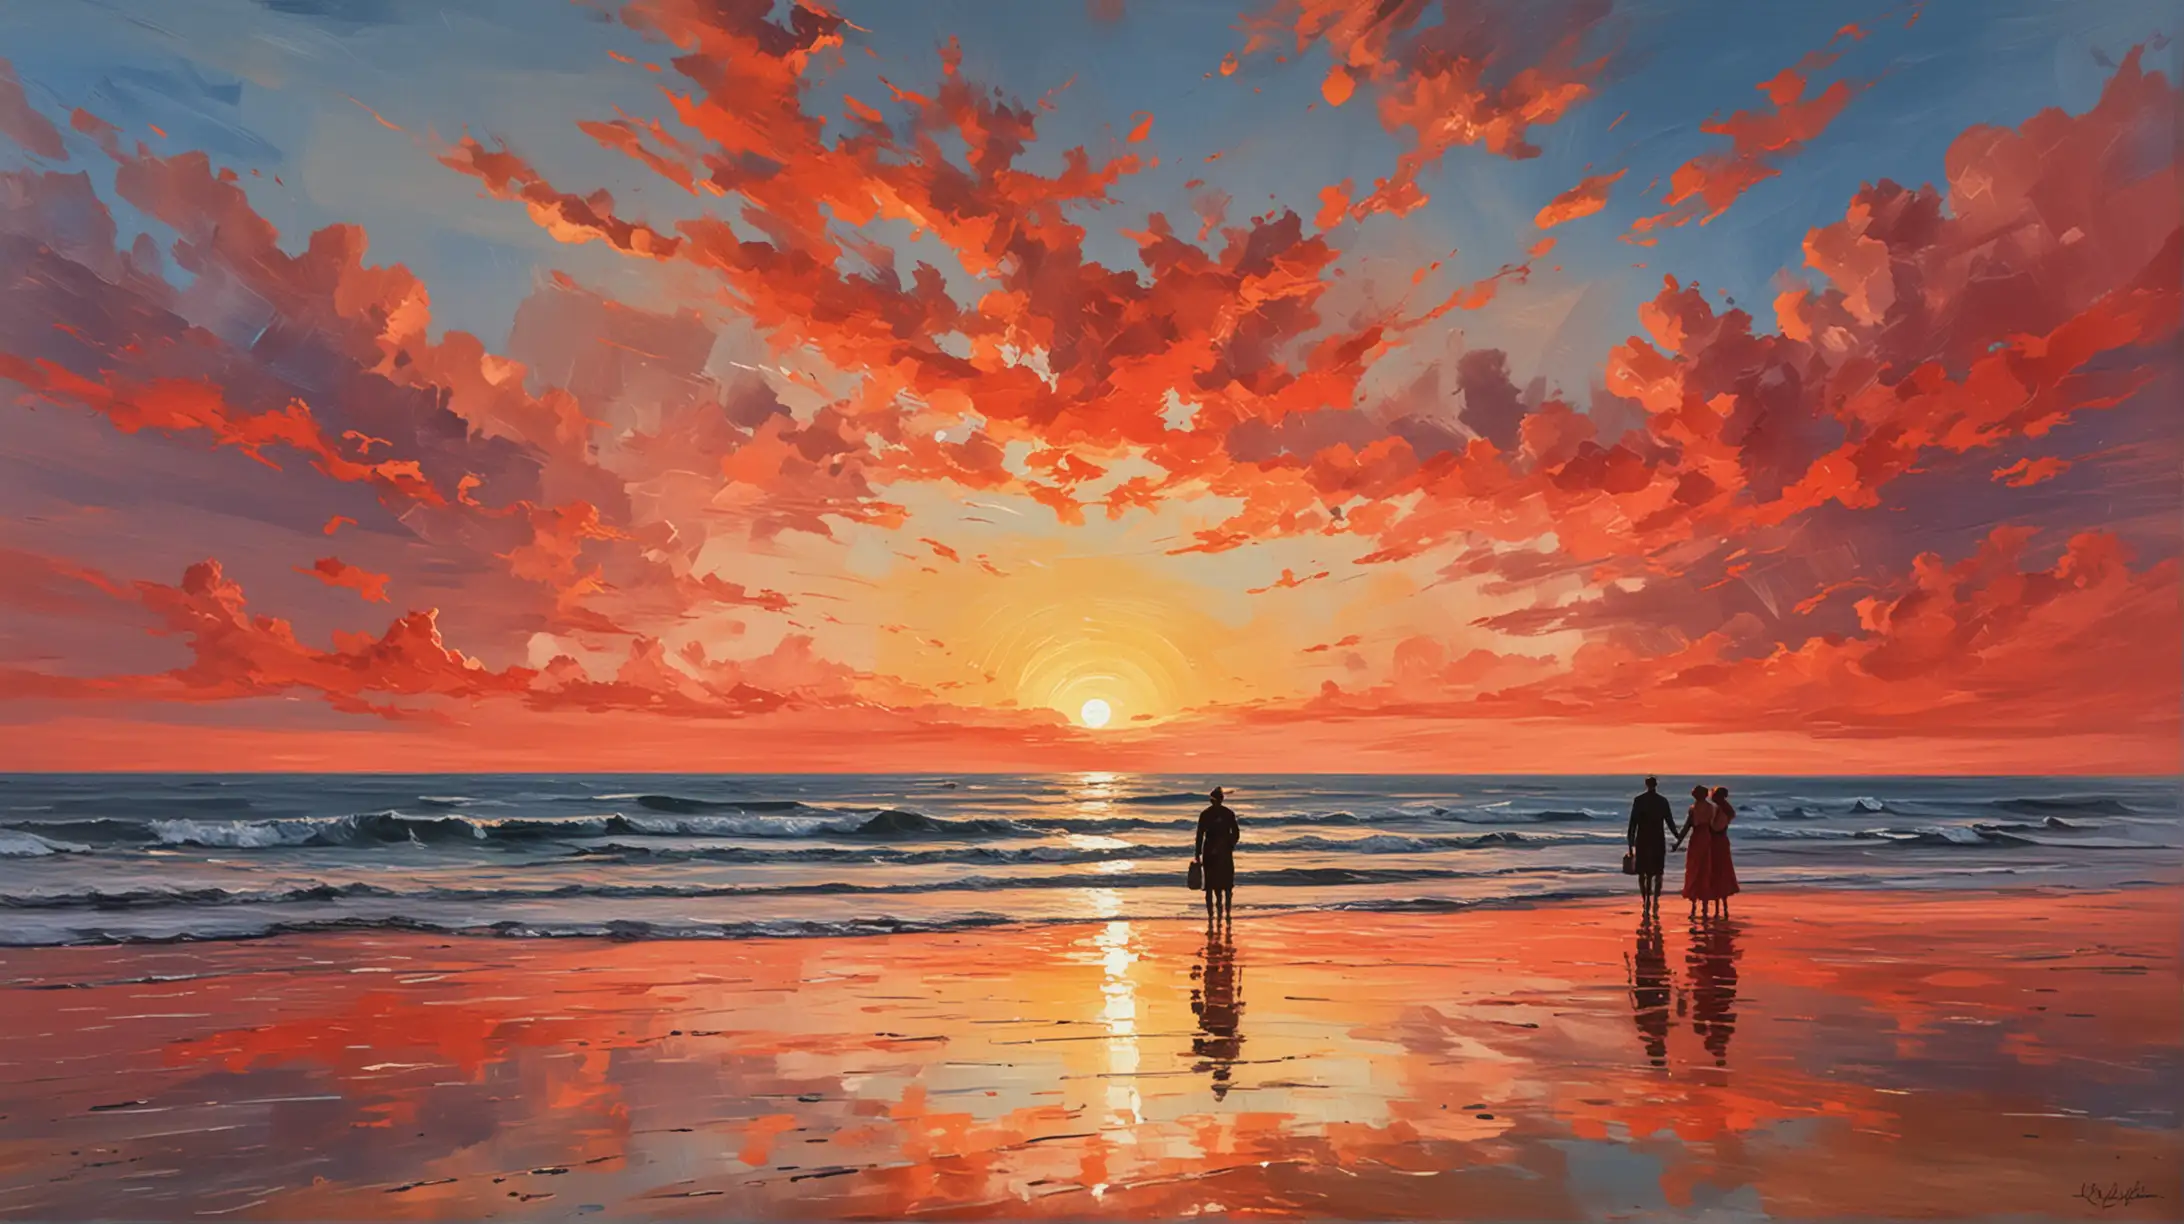 Coastal Sunset Romantic Couple Walking on Beach with Reflective Ocean and Red Sky